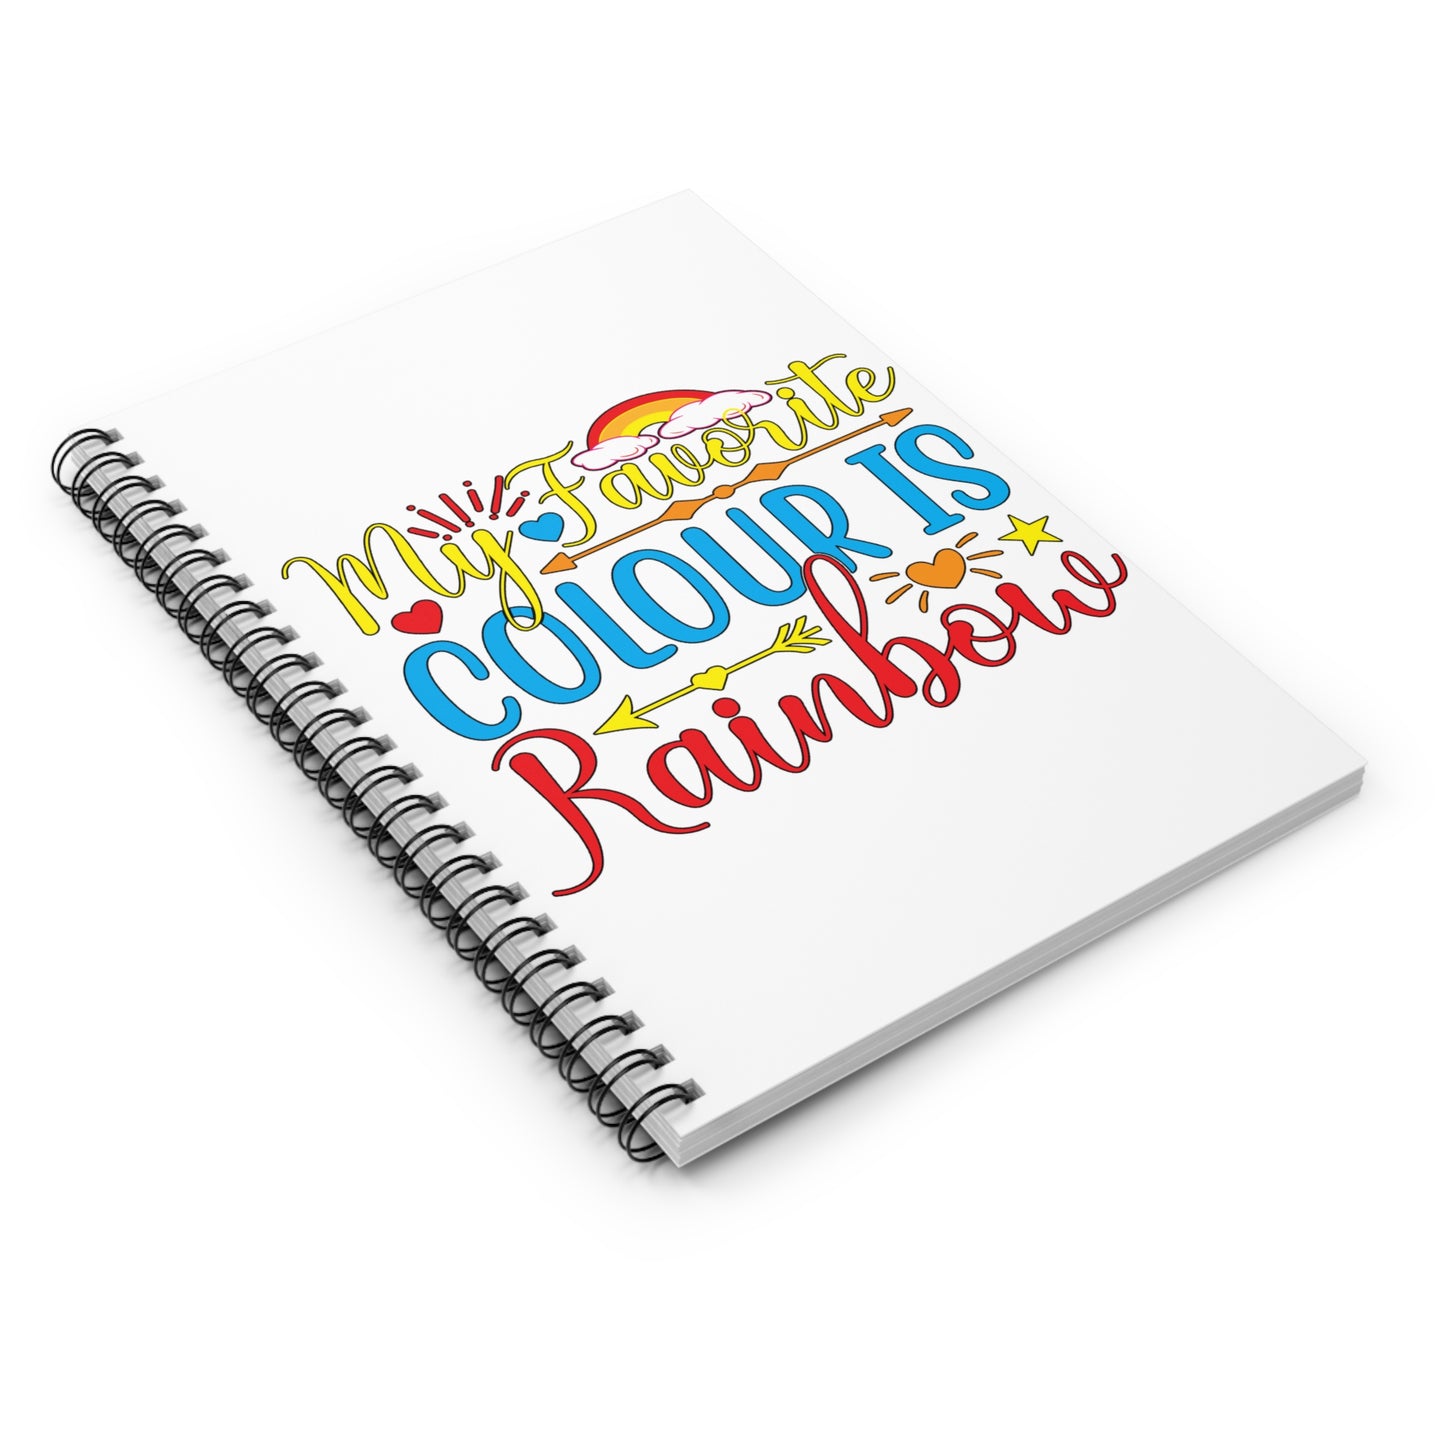 My Favorite Color is Rainbow: Spiral Notebook - Log Books - Journals - Diaries - and More Custom Printed by TheGlassyLass